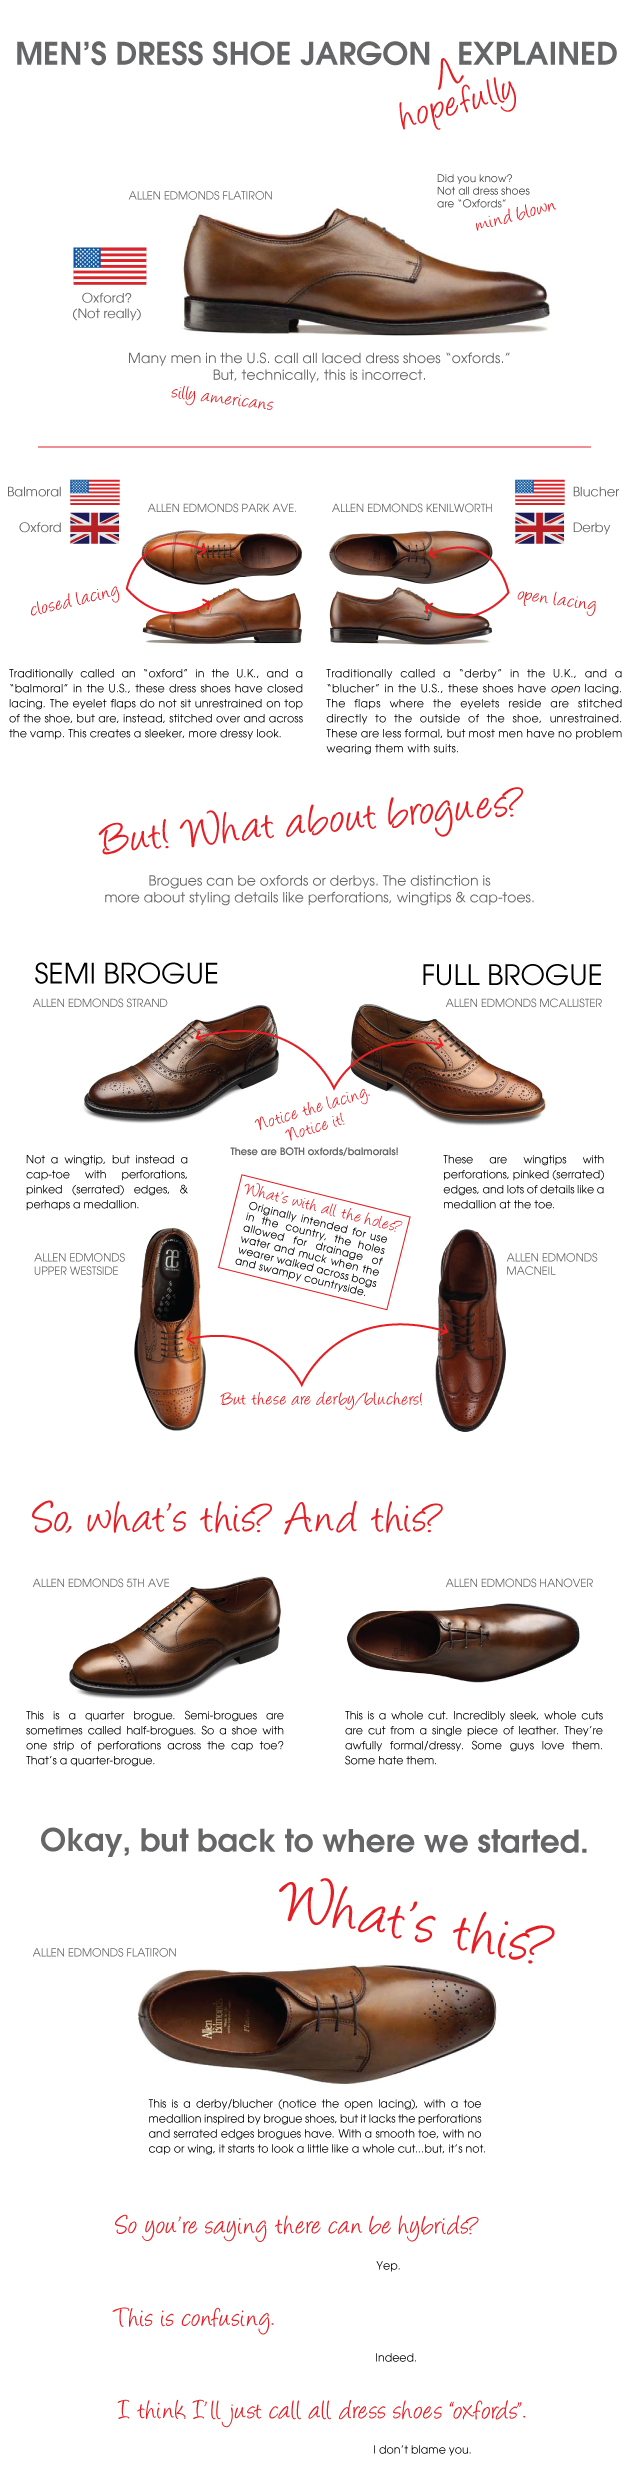 Shoe jargon explained by Dappered.com